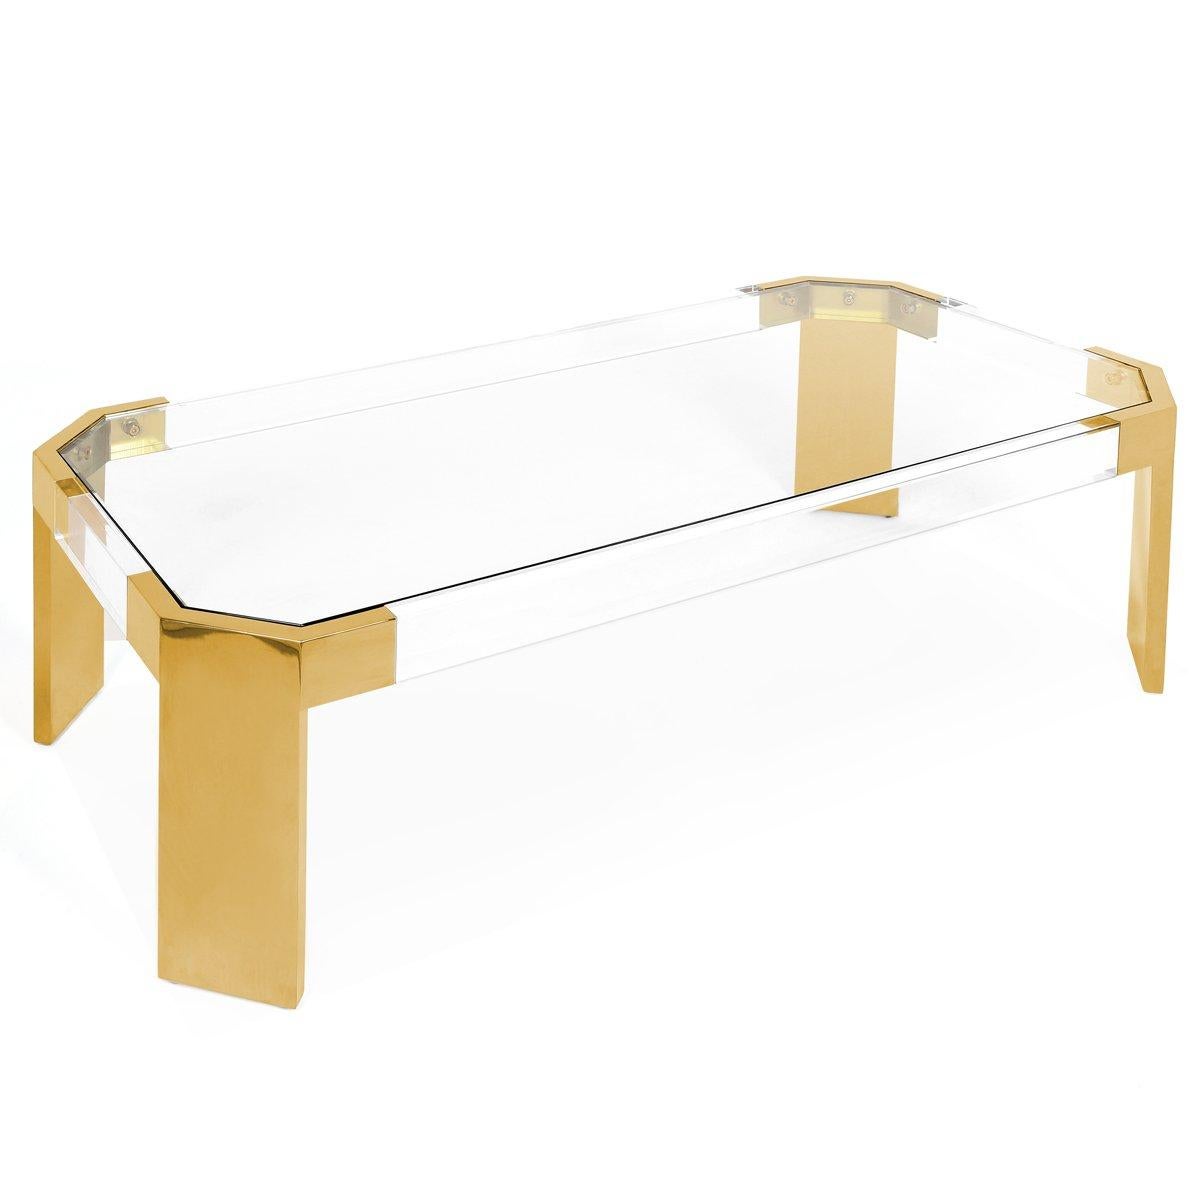 This coffee table is a show stopper! With all the right angles and dimensions that pair well with large sectionals and sofas, the Lucite coffee table makes an elegant centerpiece in any living room. Measures: 56